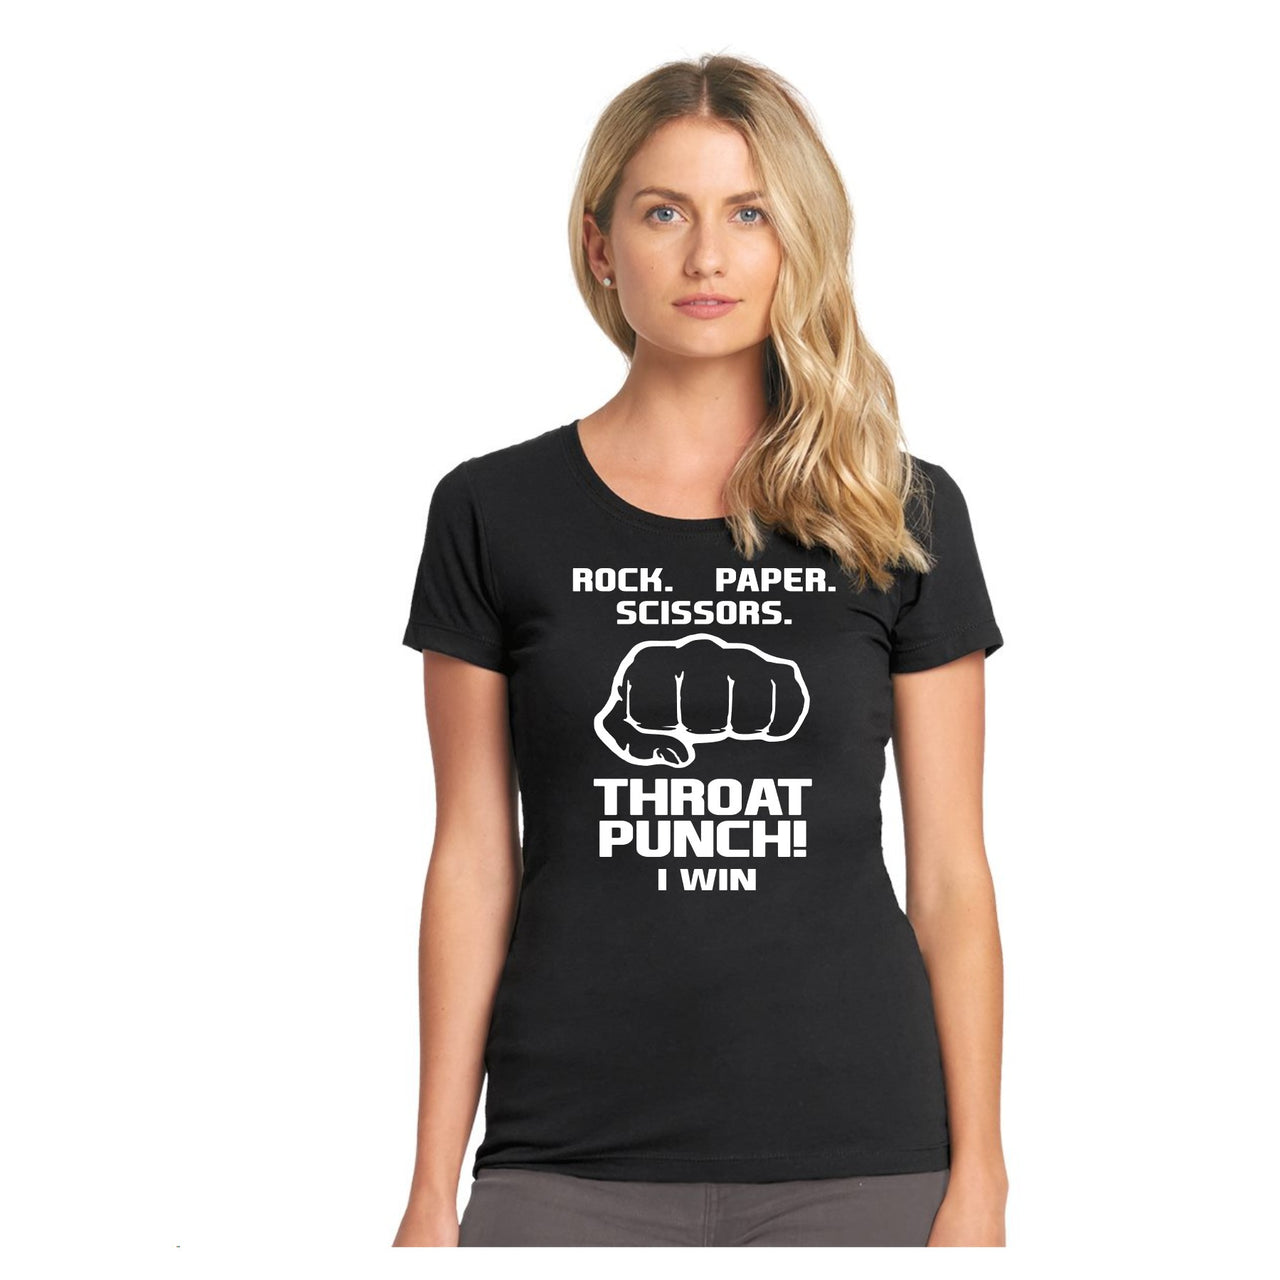 Rock. Paper. Scissors. Throat Punch - Ladies Ideal Crew Tee (Size Large Available)